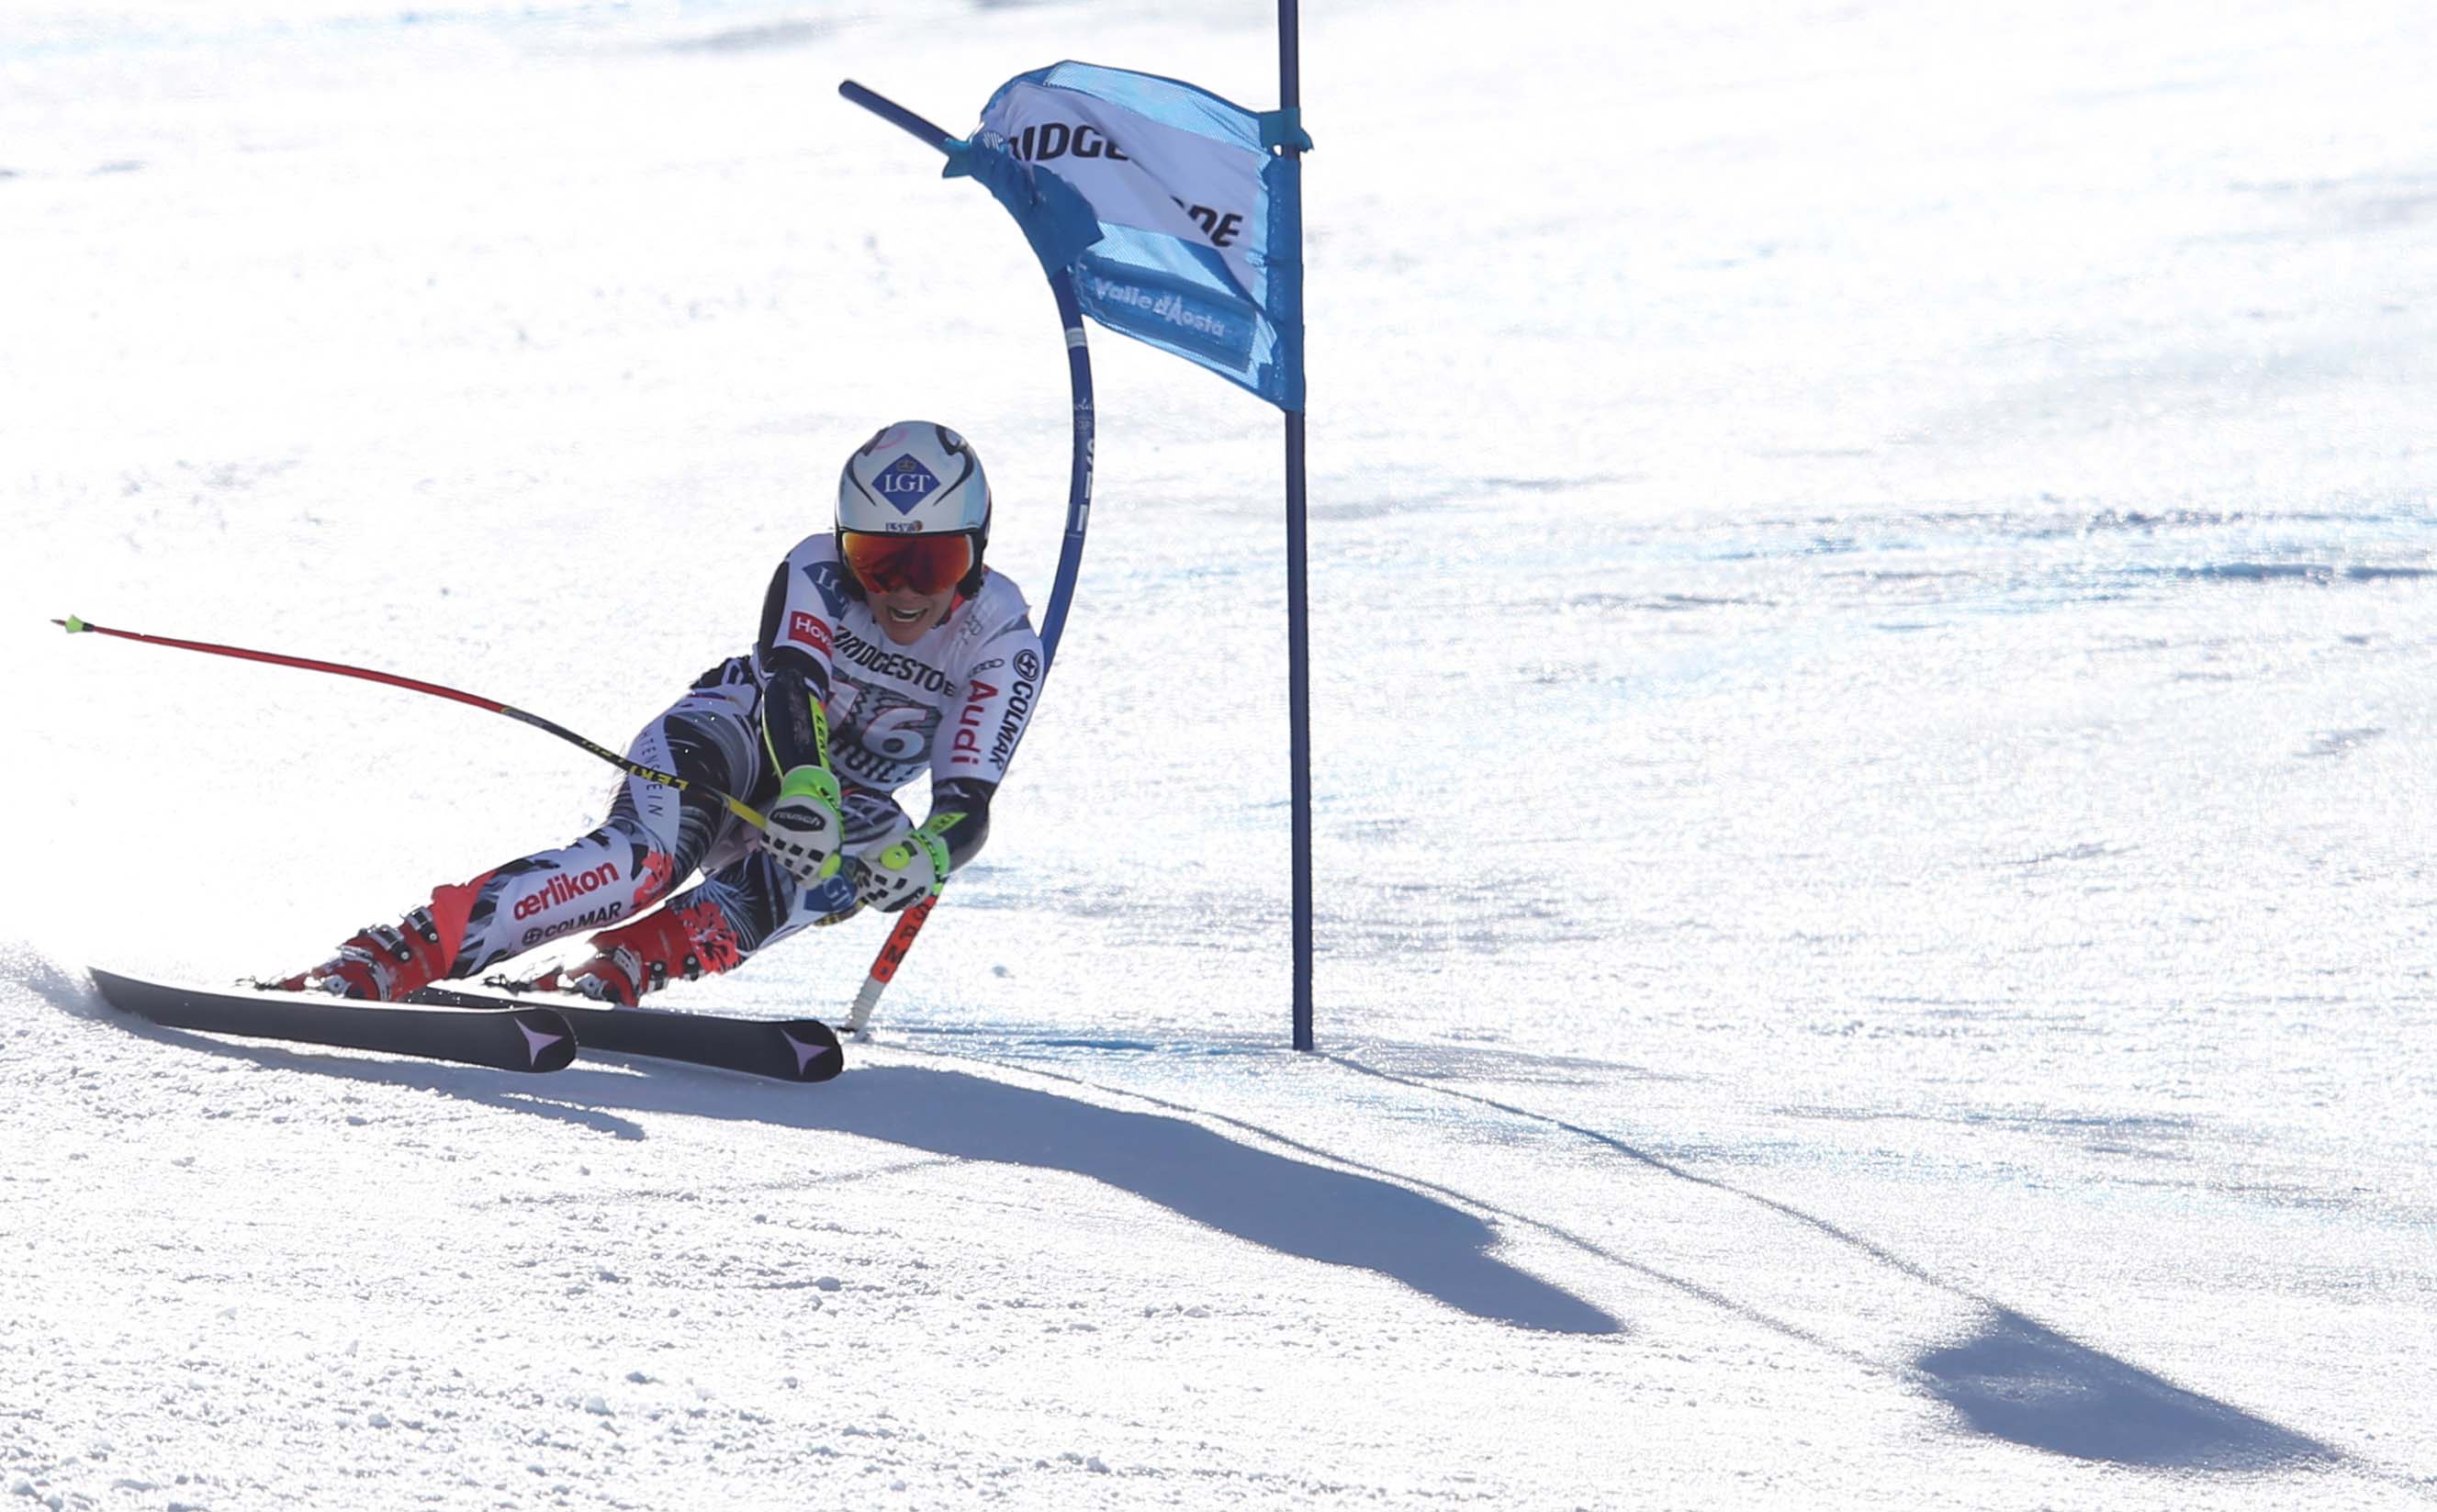 LA THUILE,ITALY,21.FEB.16 - ALPINE SKIING - FIS World Cup, Super G, ladies. Image shows Tina Weirather (LIE). Photo: GEPA pictures/ Andreas Pranter